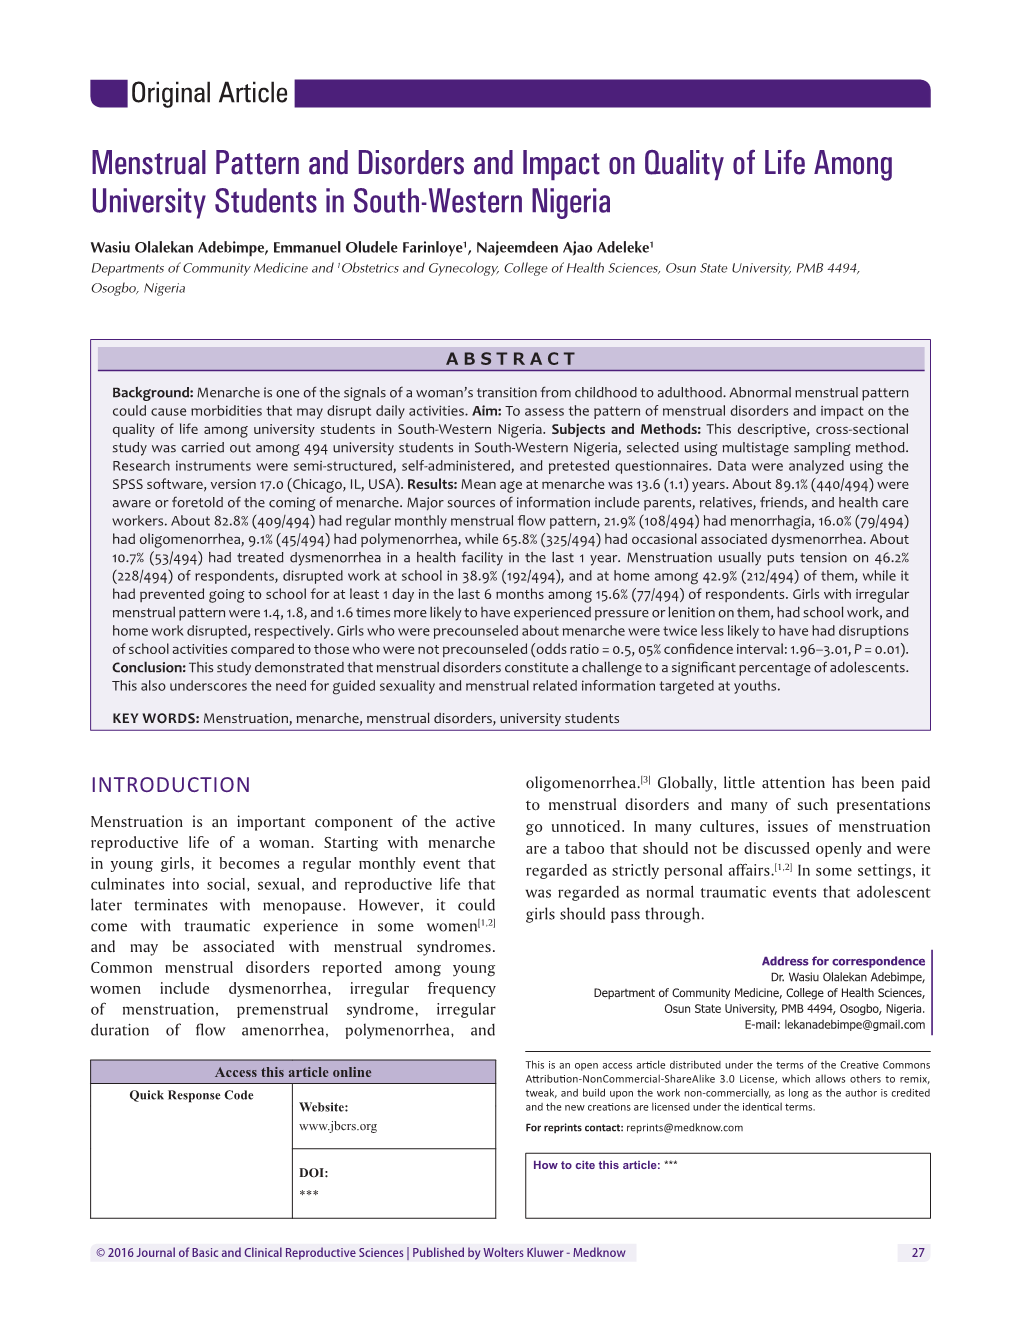 Menstrual Pattern and Disorders and Impact on Quality of Life Among University Students in South-Western Nigeria